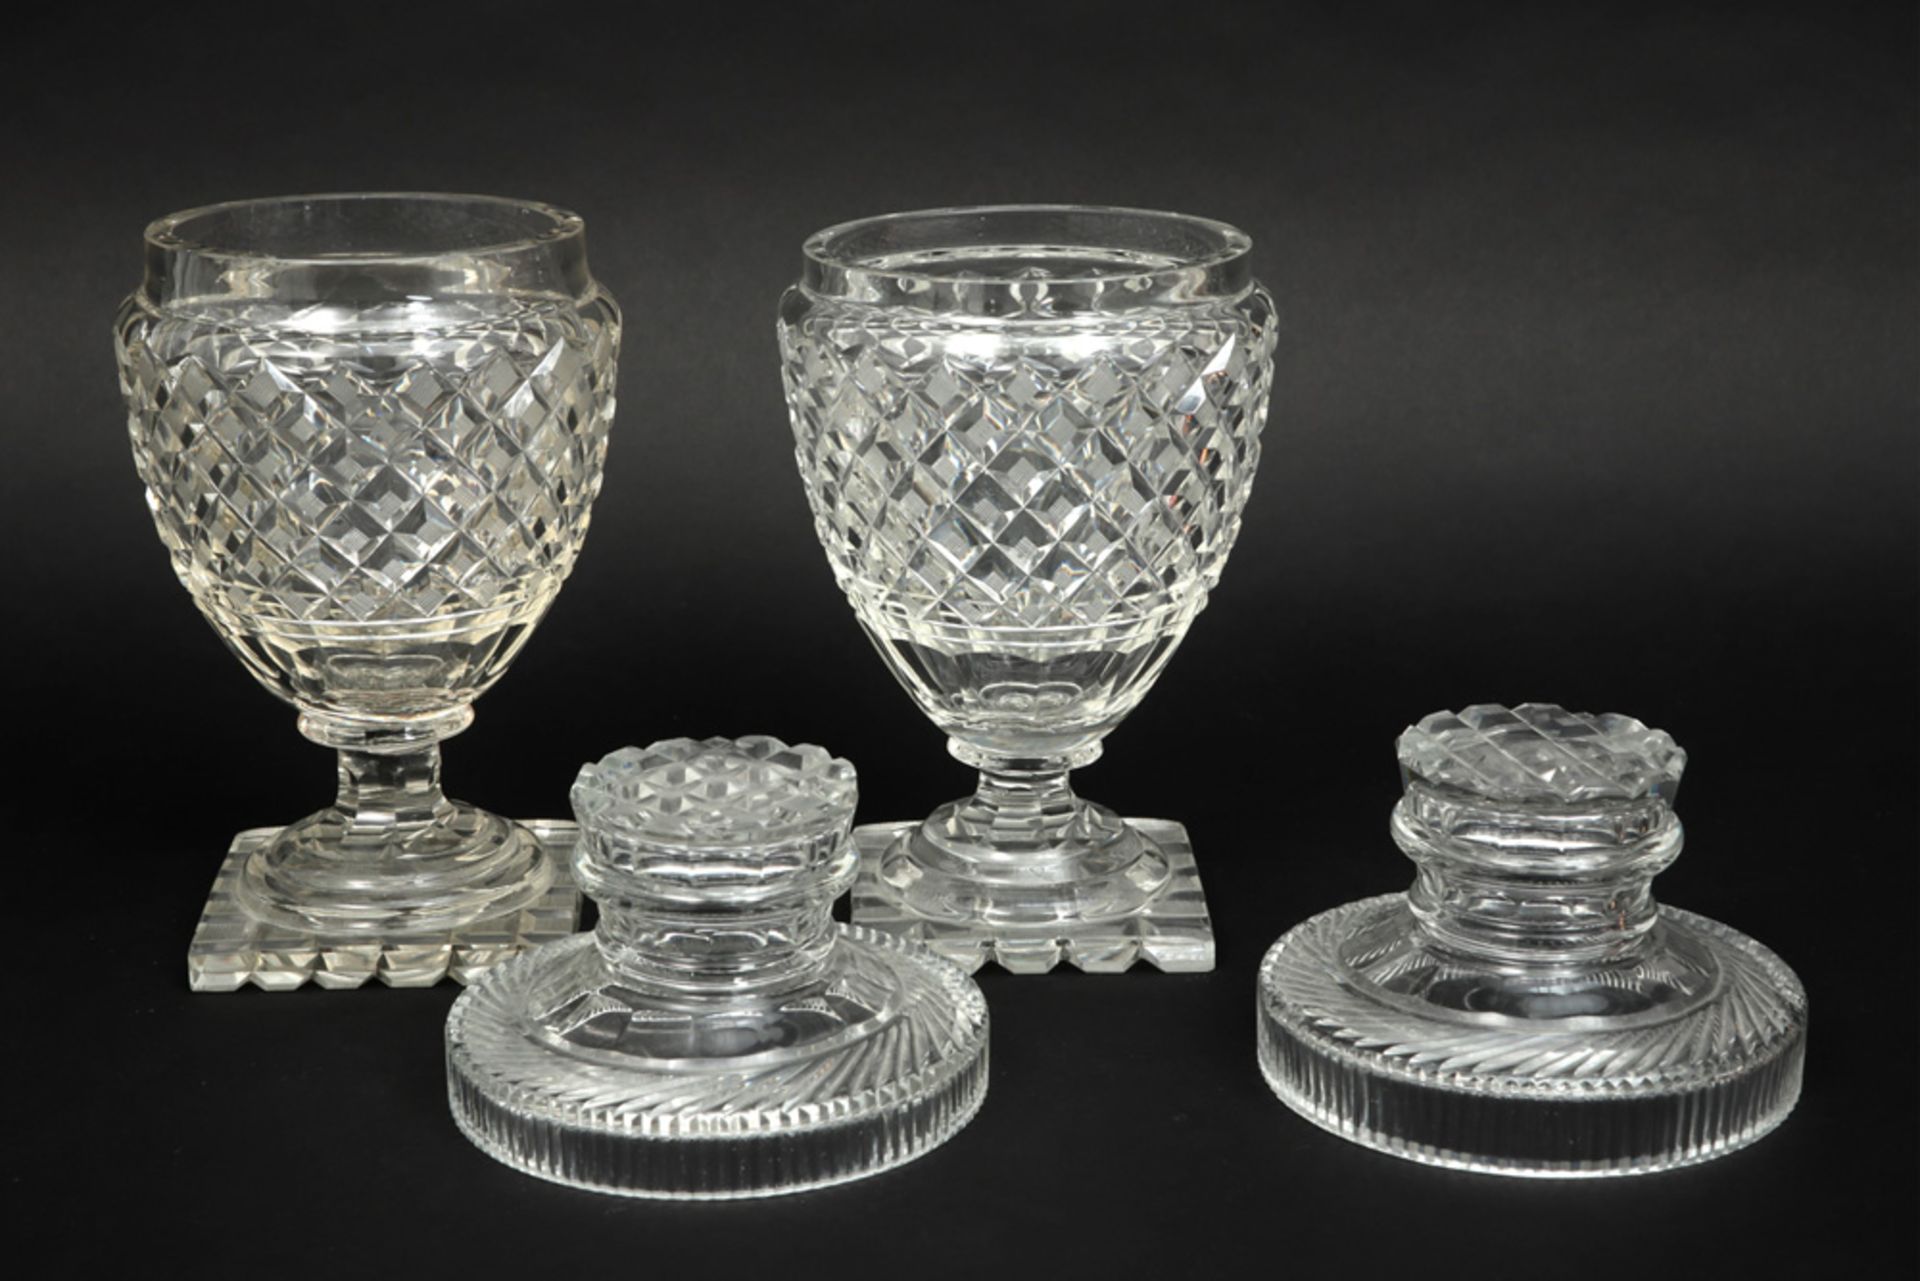 pair of antique lidded sweet's jars in clear crystal glass - Image 2 of 2